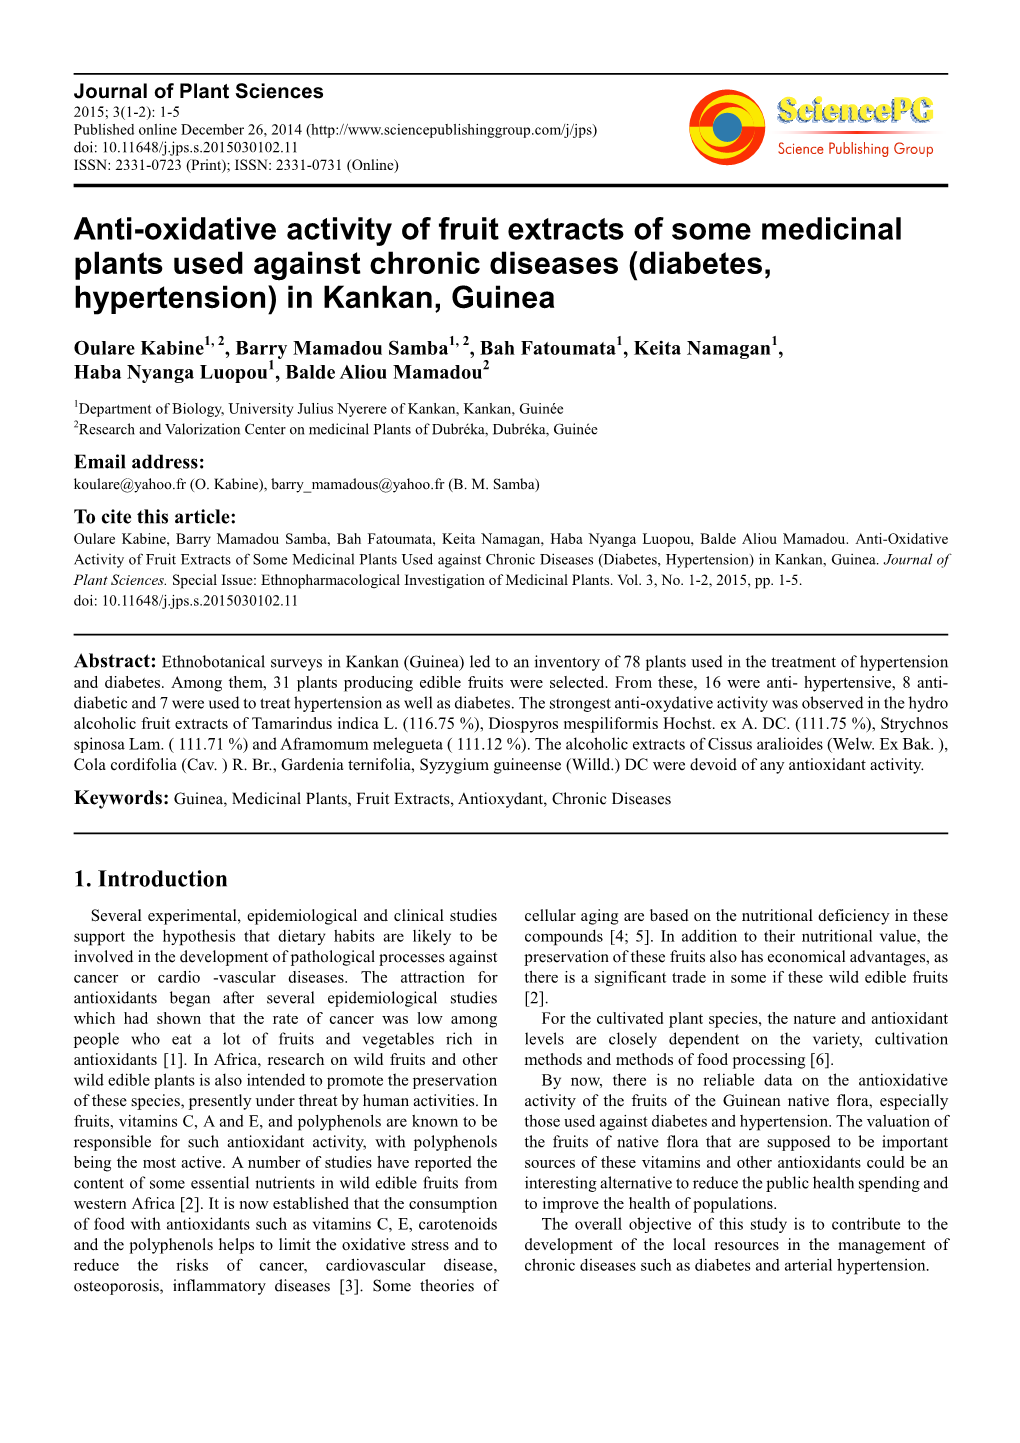 Anti-Oxidative Activity of Fruit Extracts of Some Medicinal Plants Used Against Chronic Diseases (Diabetes, Hypertension) in Kankan, Guinea